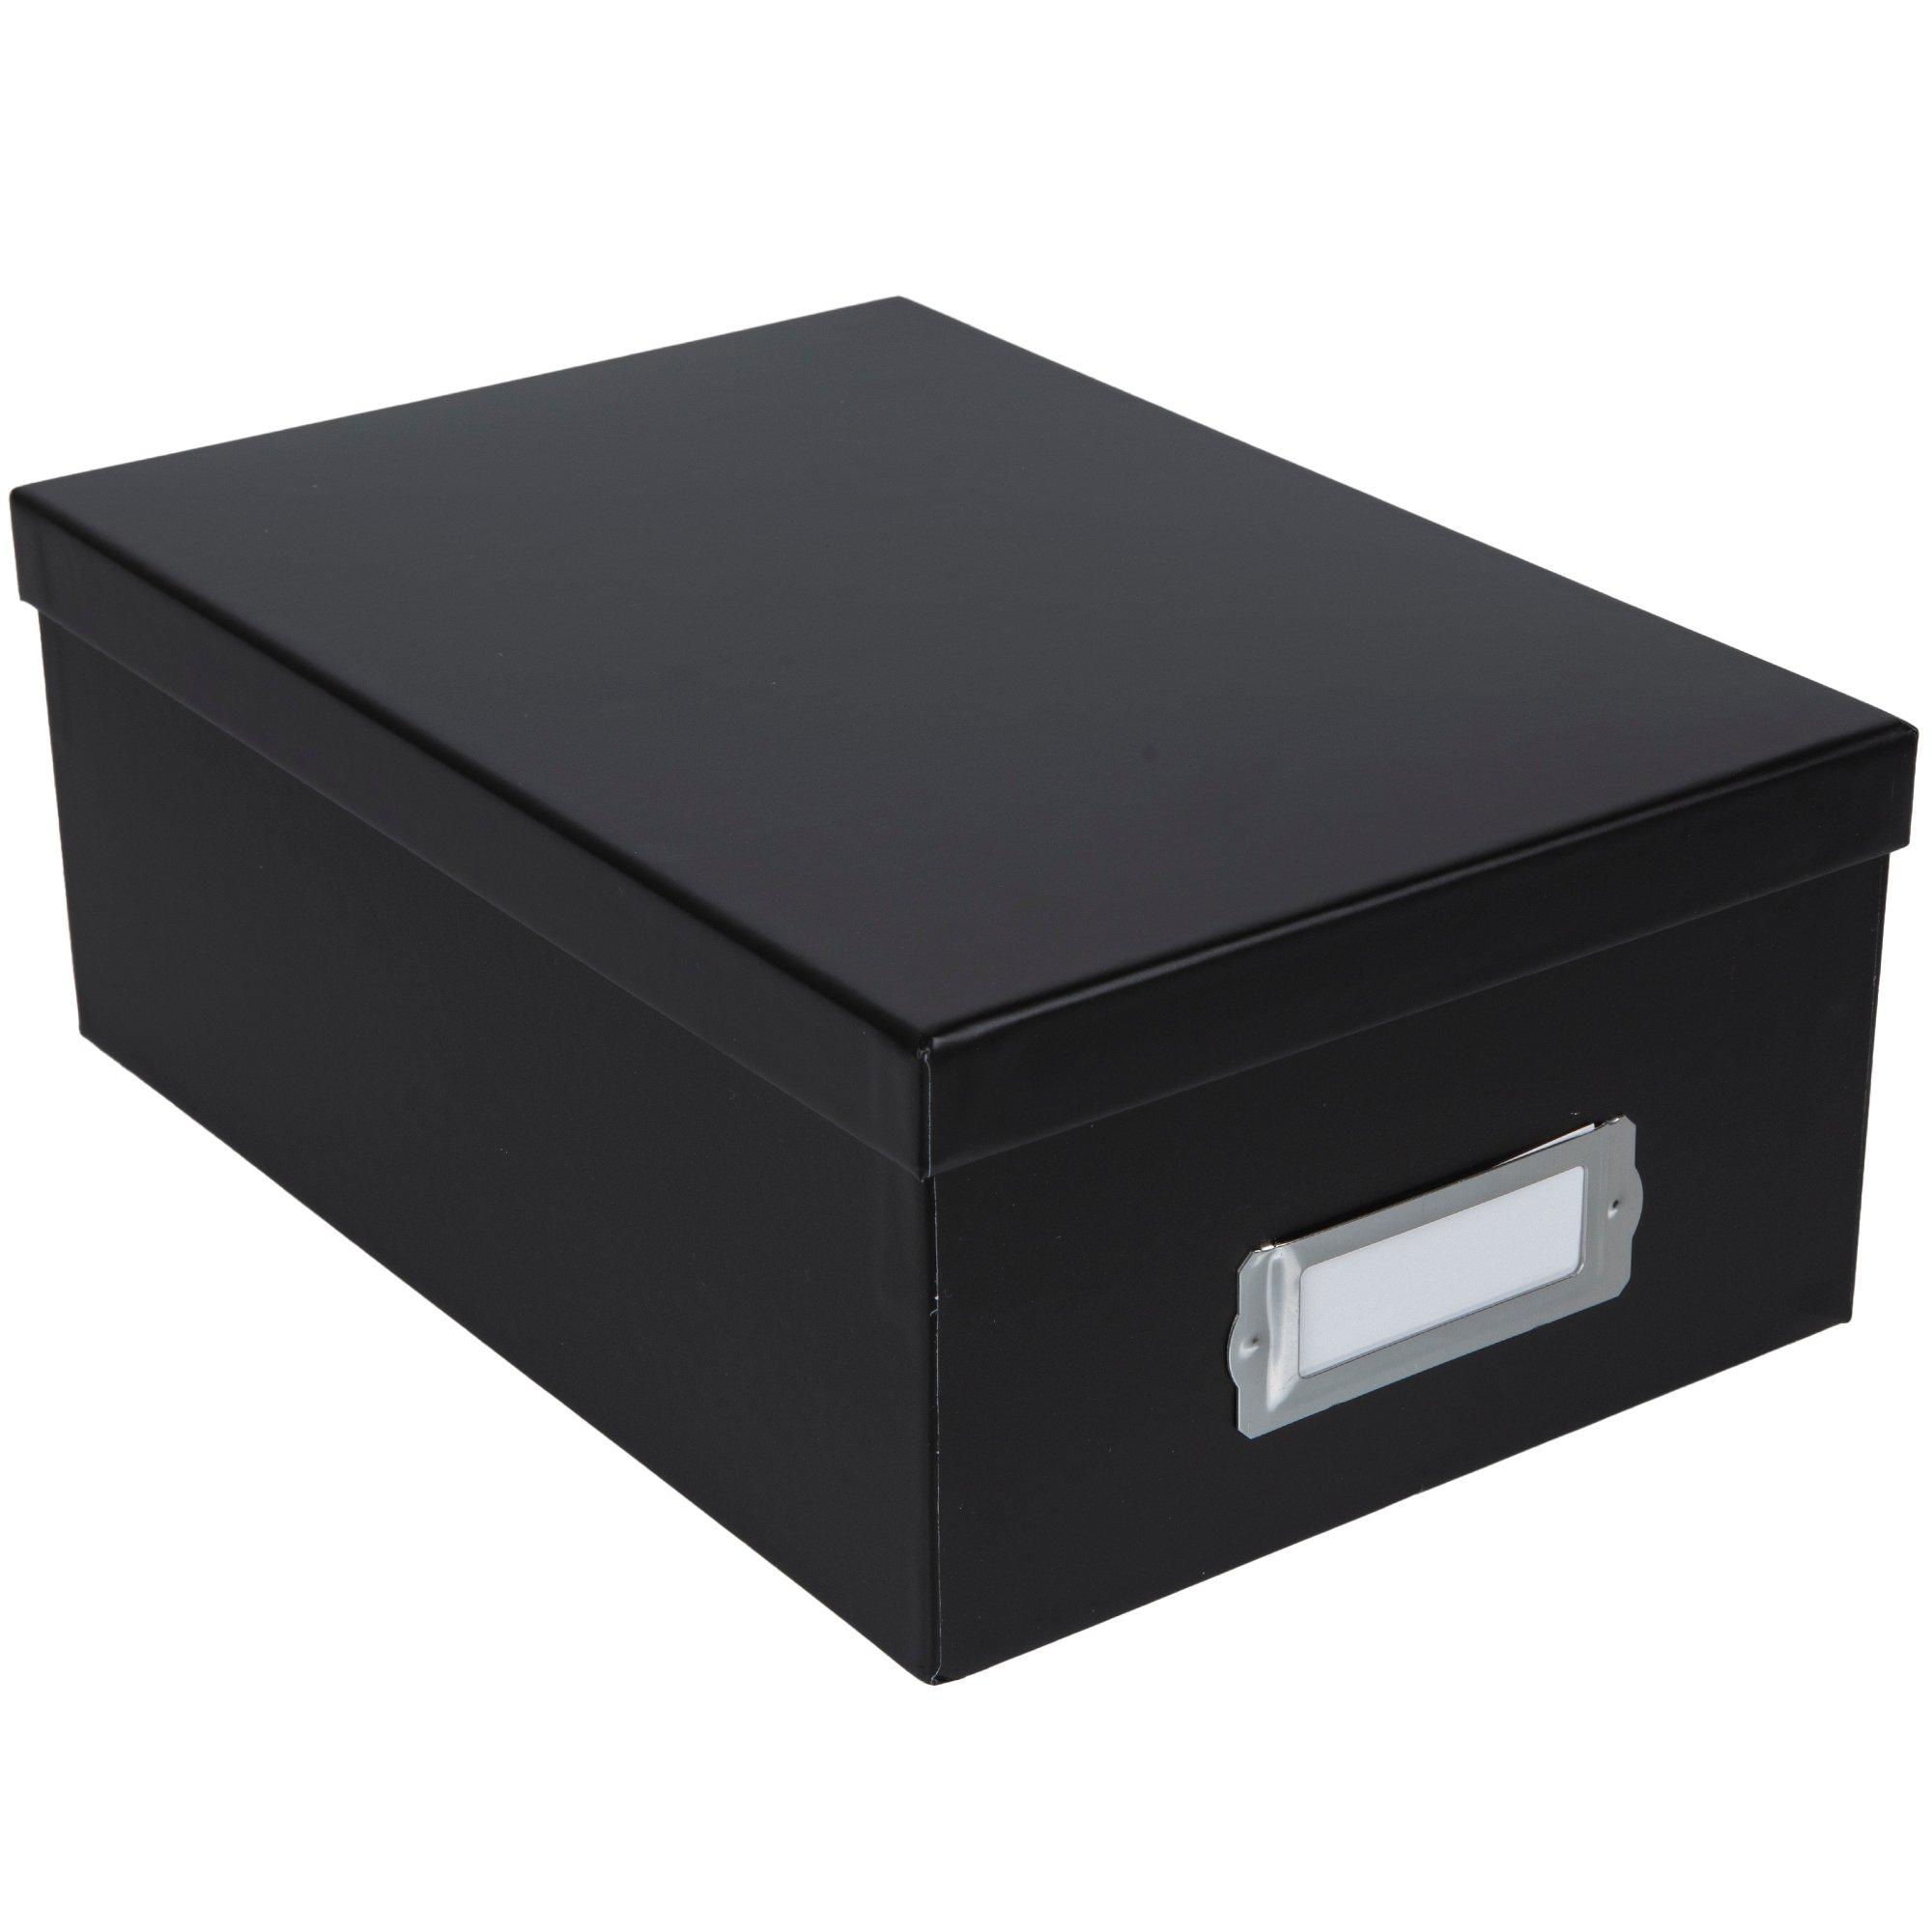 Superb Quality 5x7 photo storage box With Luring Discounts 